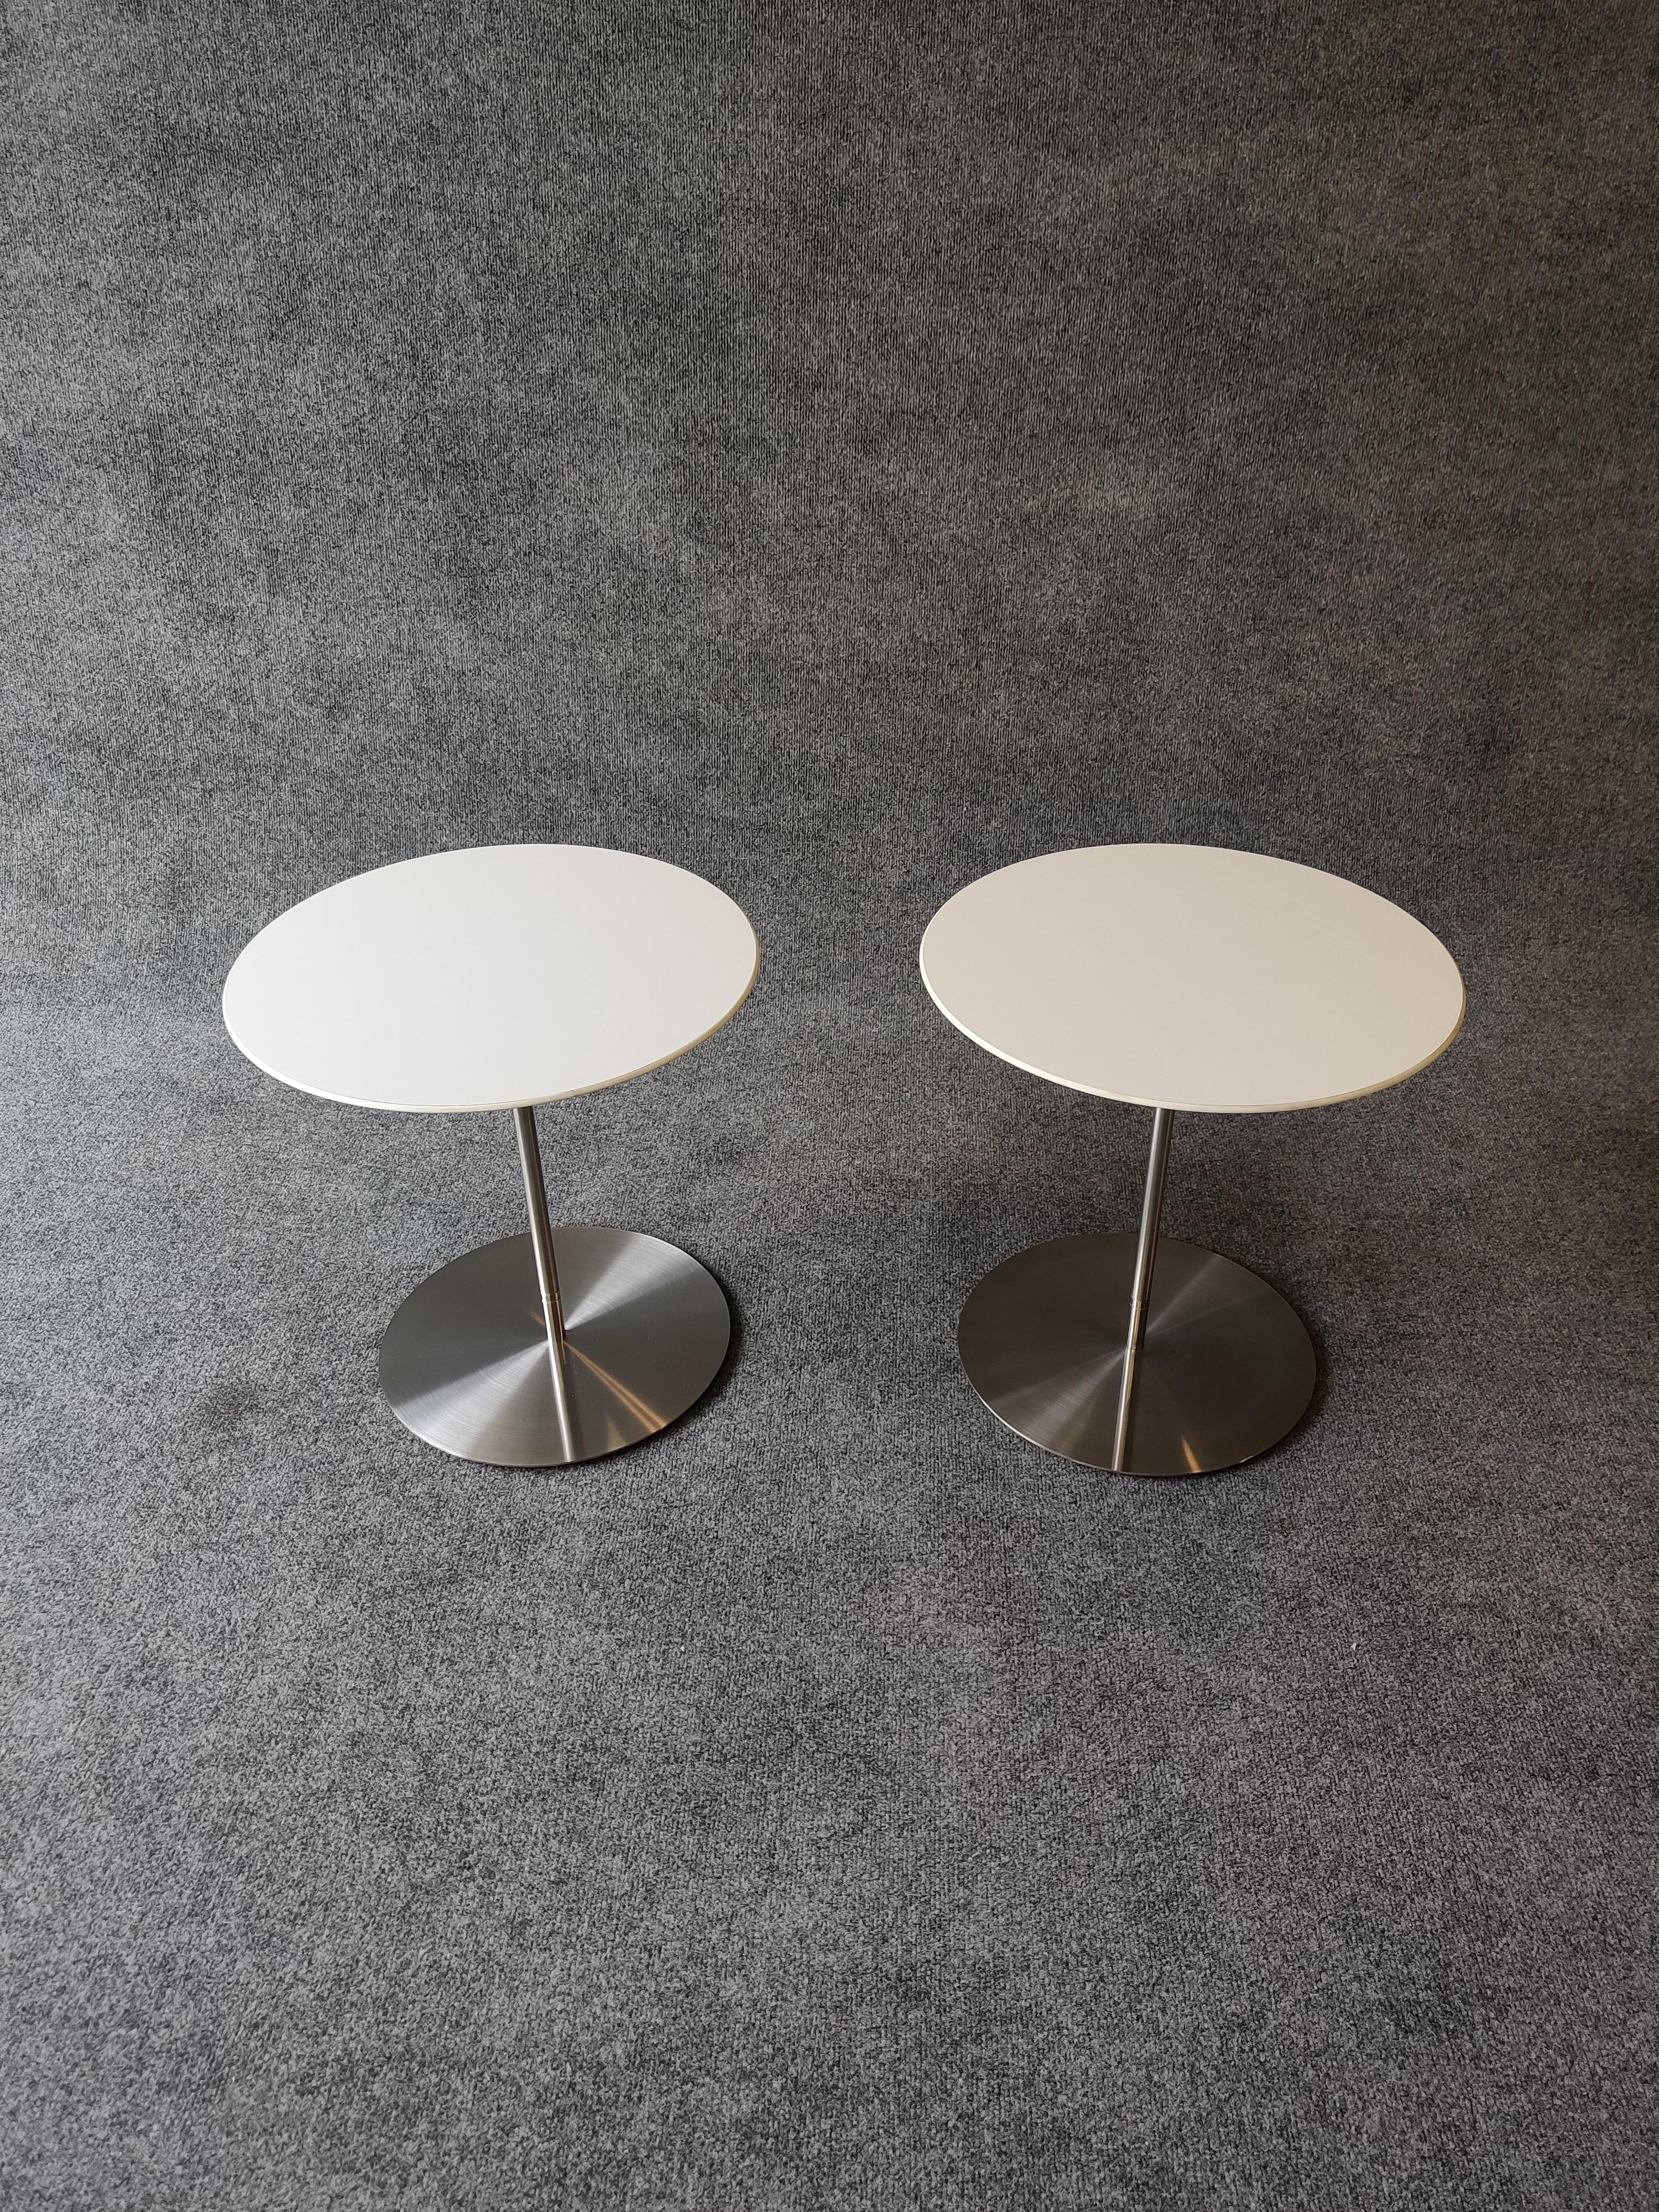 Pair of side or occasional designed by Jephson Robb an manufactured by Bernhardt Design. In white laminate on stainless steel bases. Simple and subtle details make these tables wonderfully practical. 

About Jephson Robb: Scottish artist and